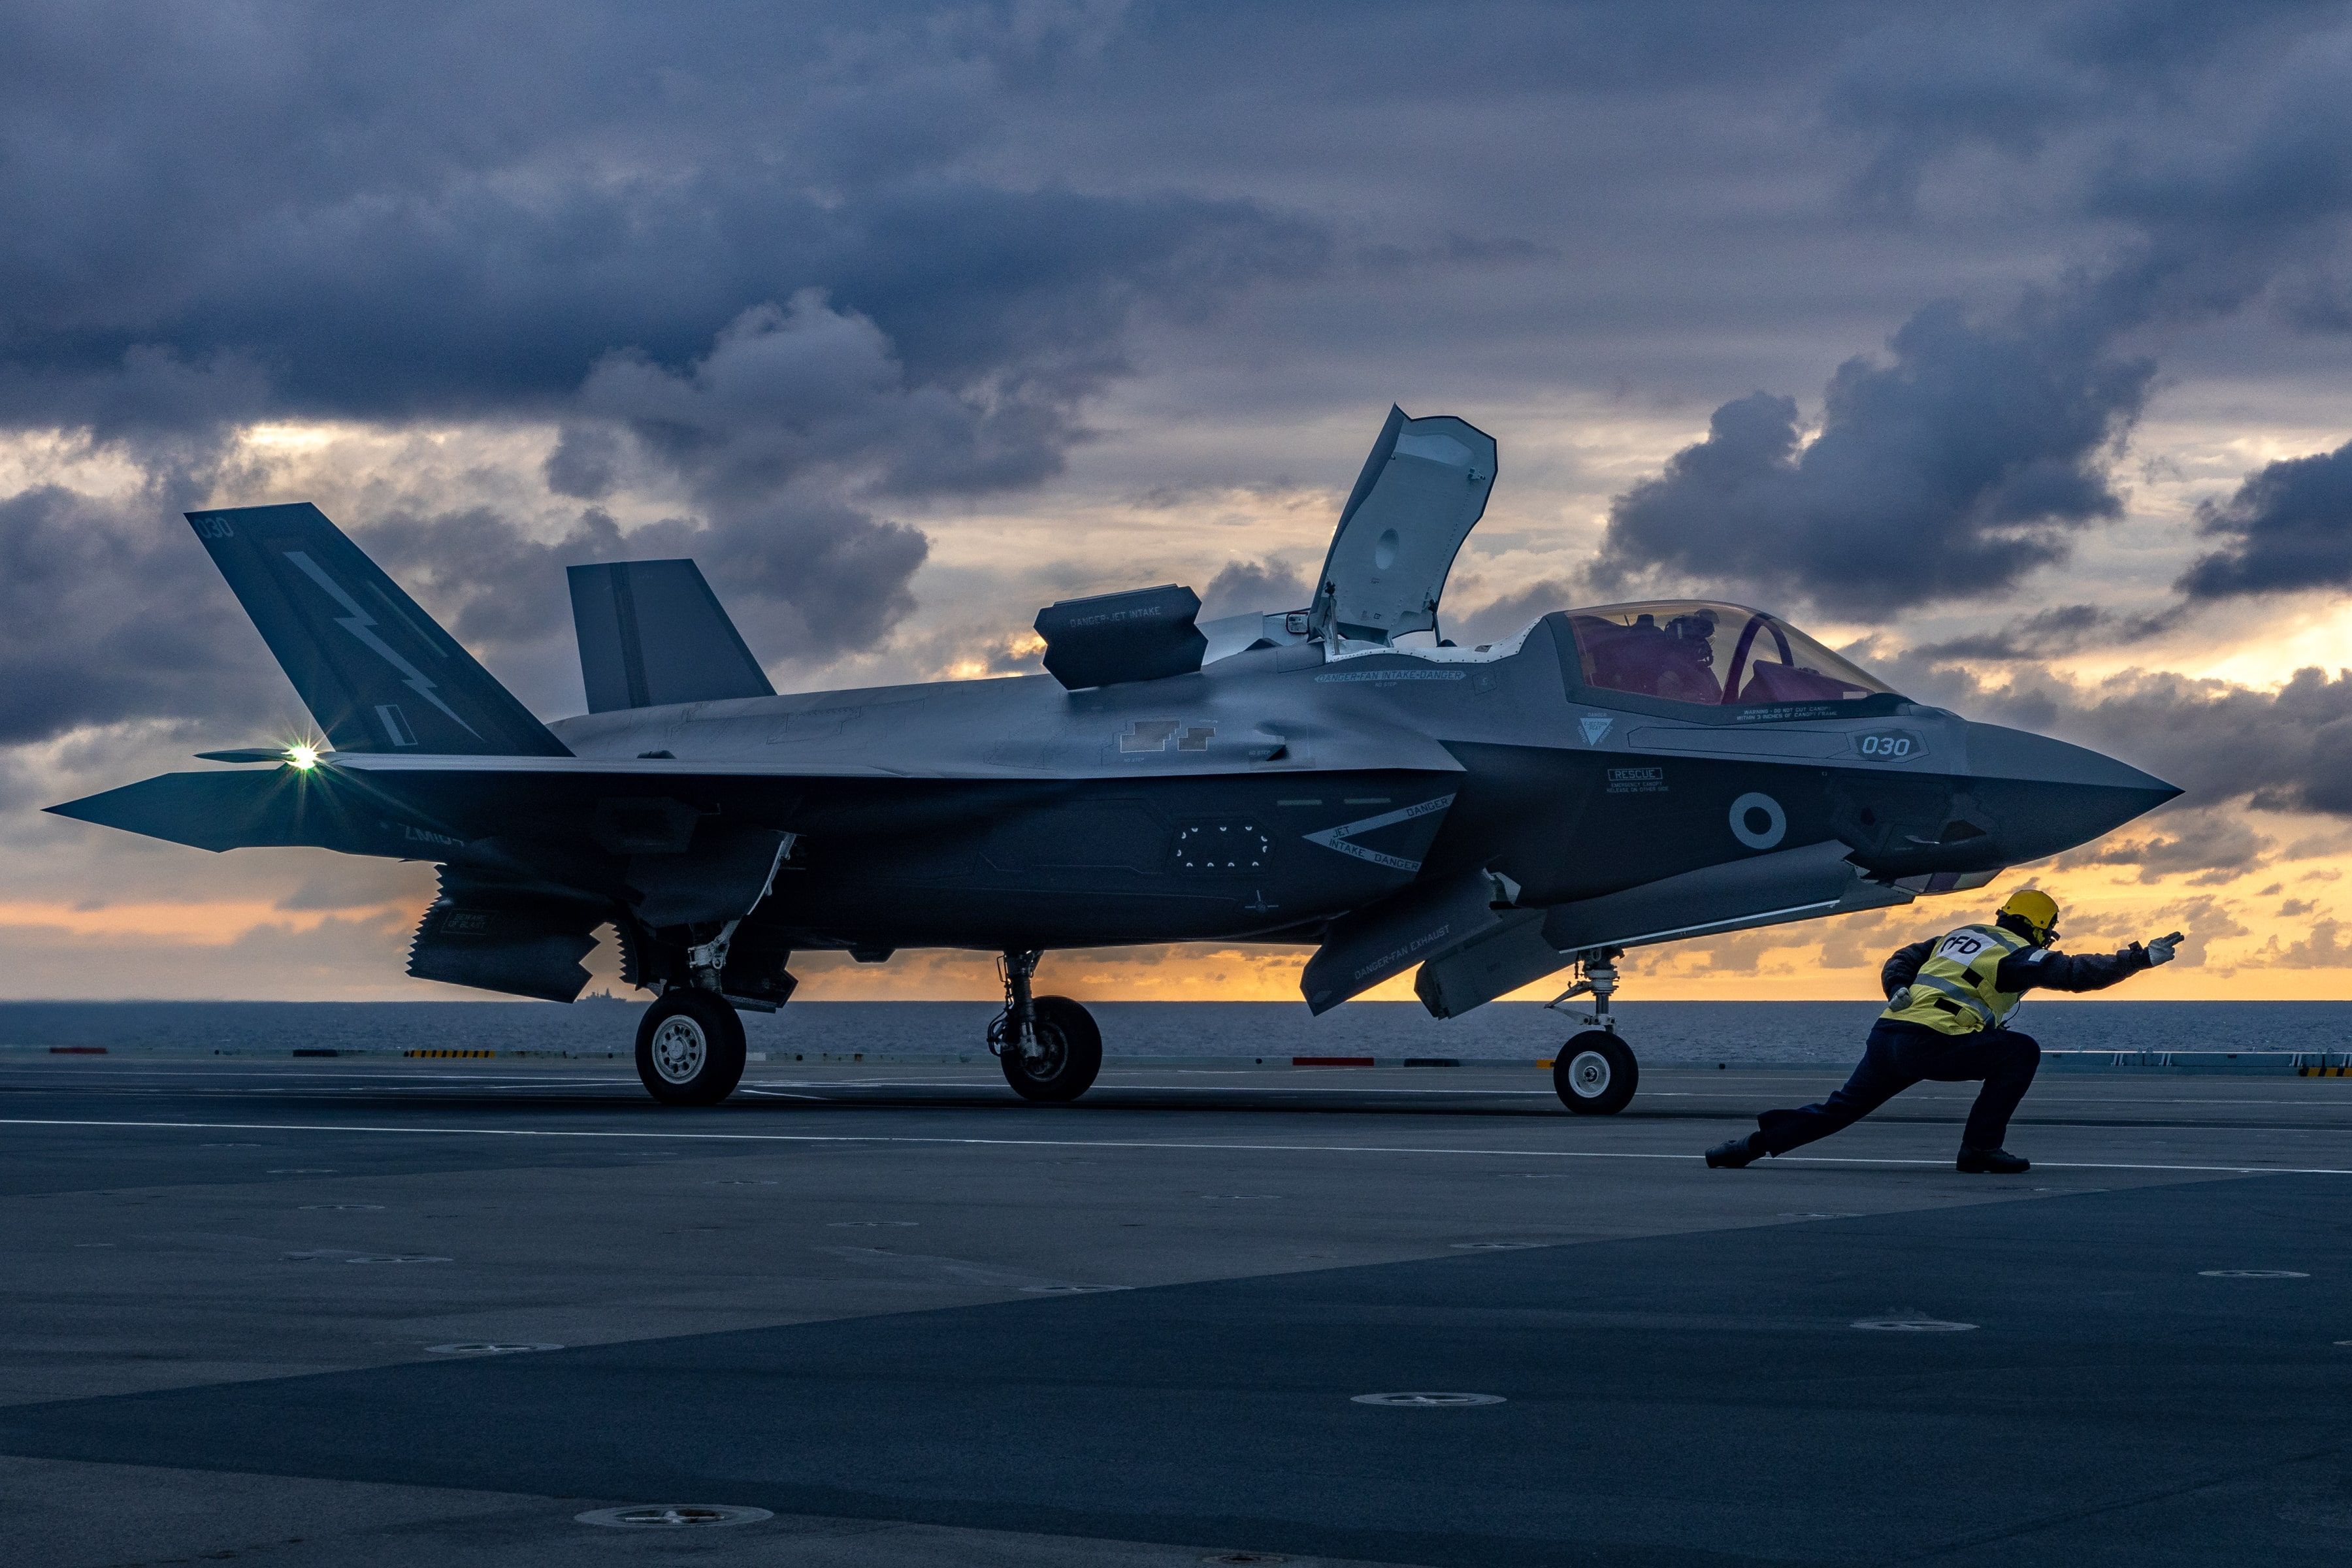 F-35B ready to take off on aircraft carrier at dusk